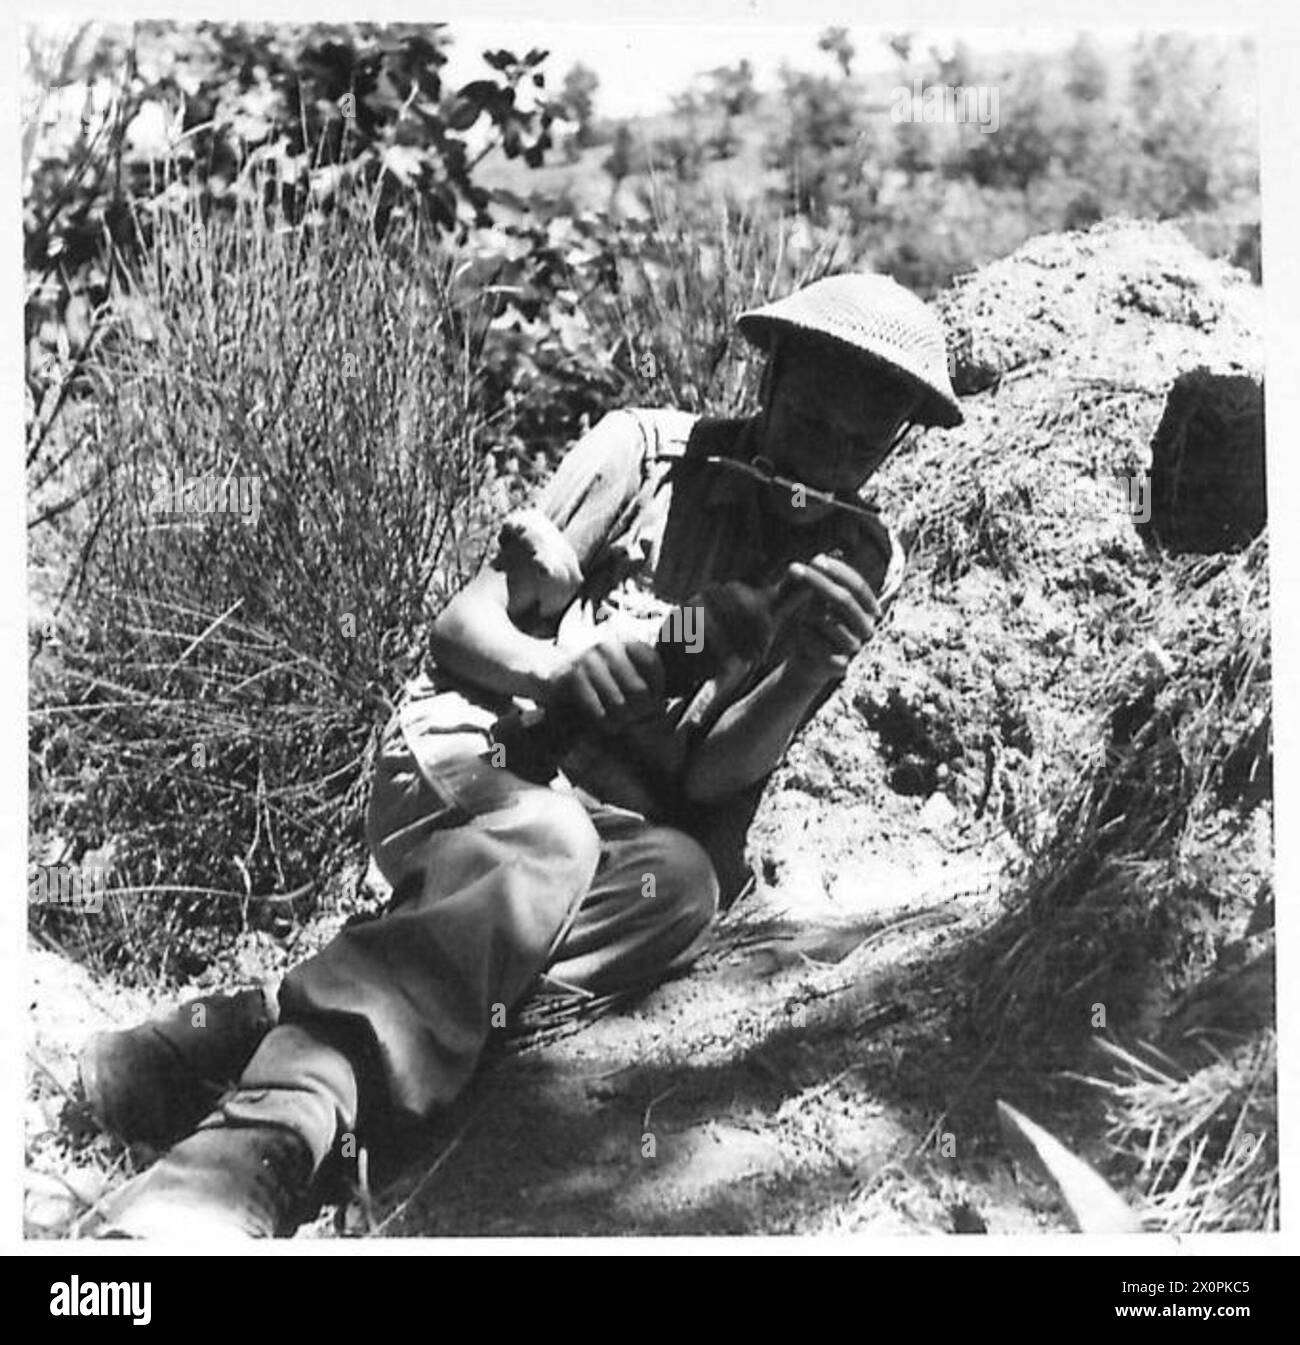 EIGHTH ARMY : BATTLE FOR AREZZO - Rfn. W. Varley of Ipswich, with clasp knife in his teeth, primes a bomb for the P.I.A.T. Photographic negative , British Army Stock Photo